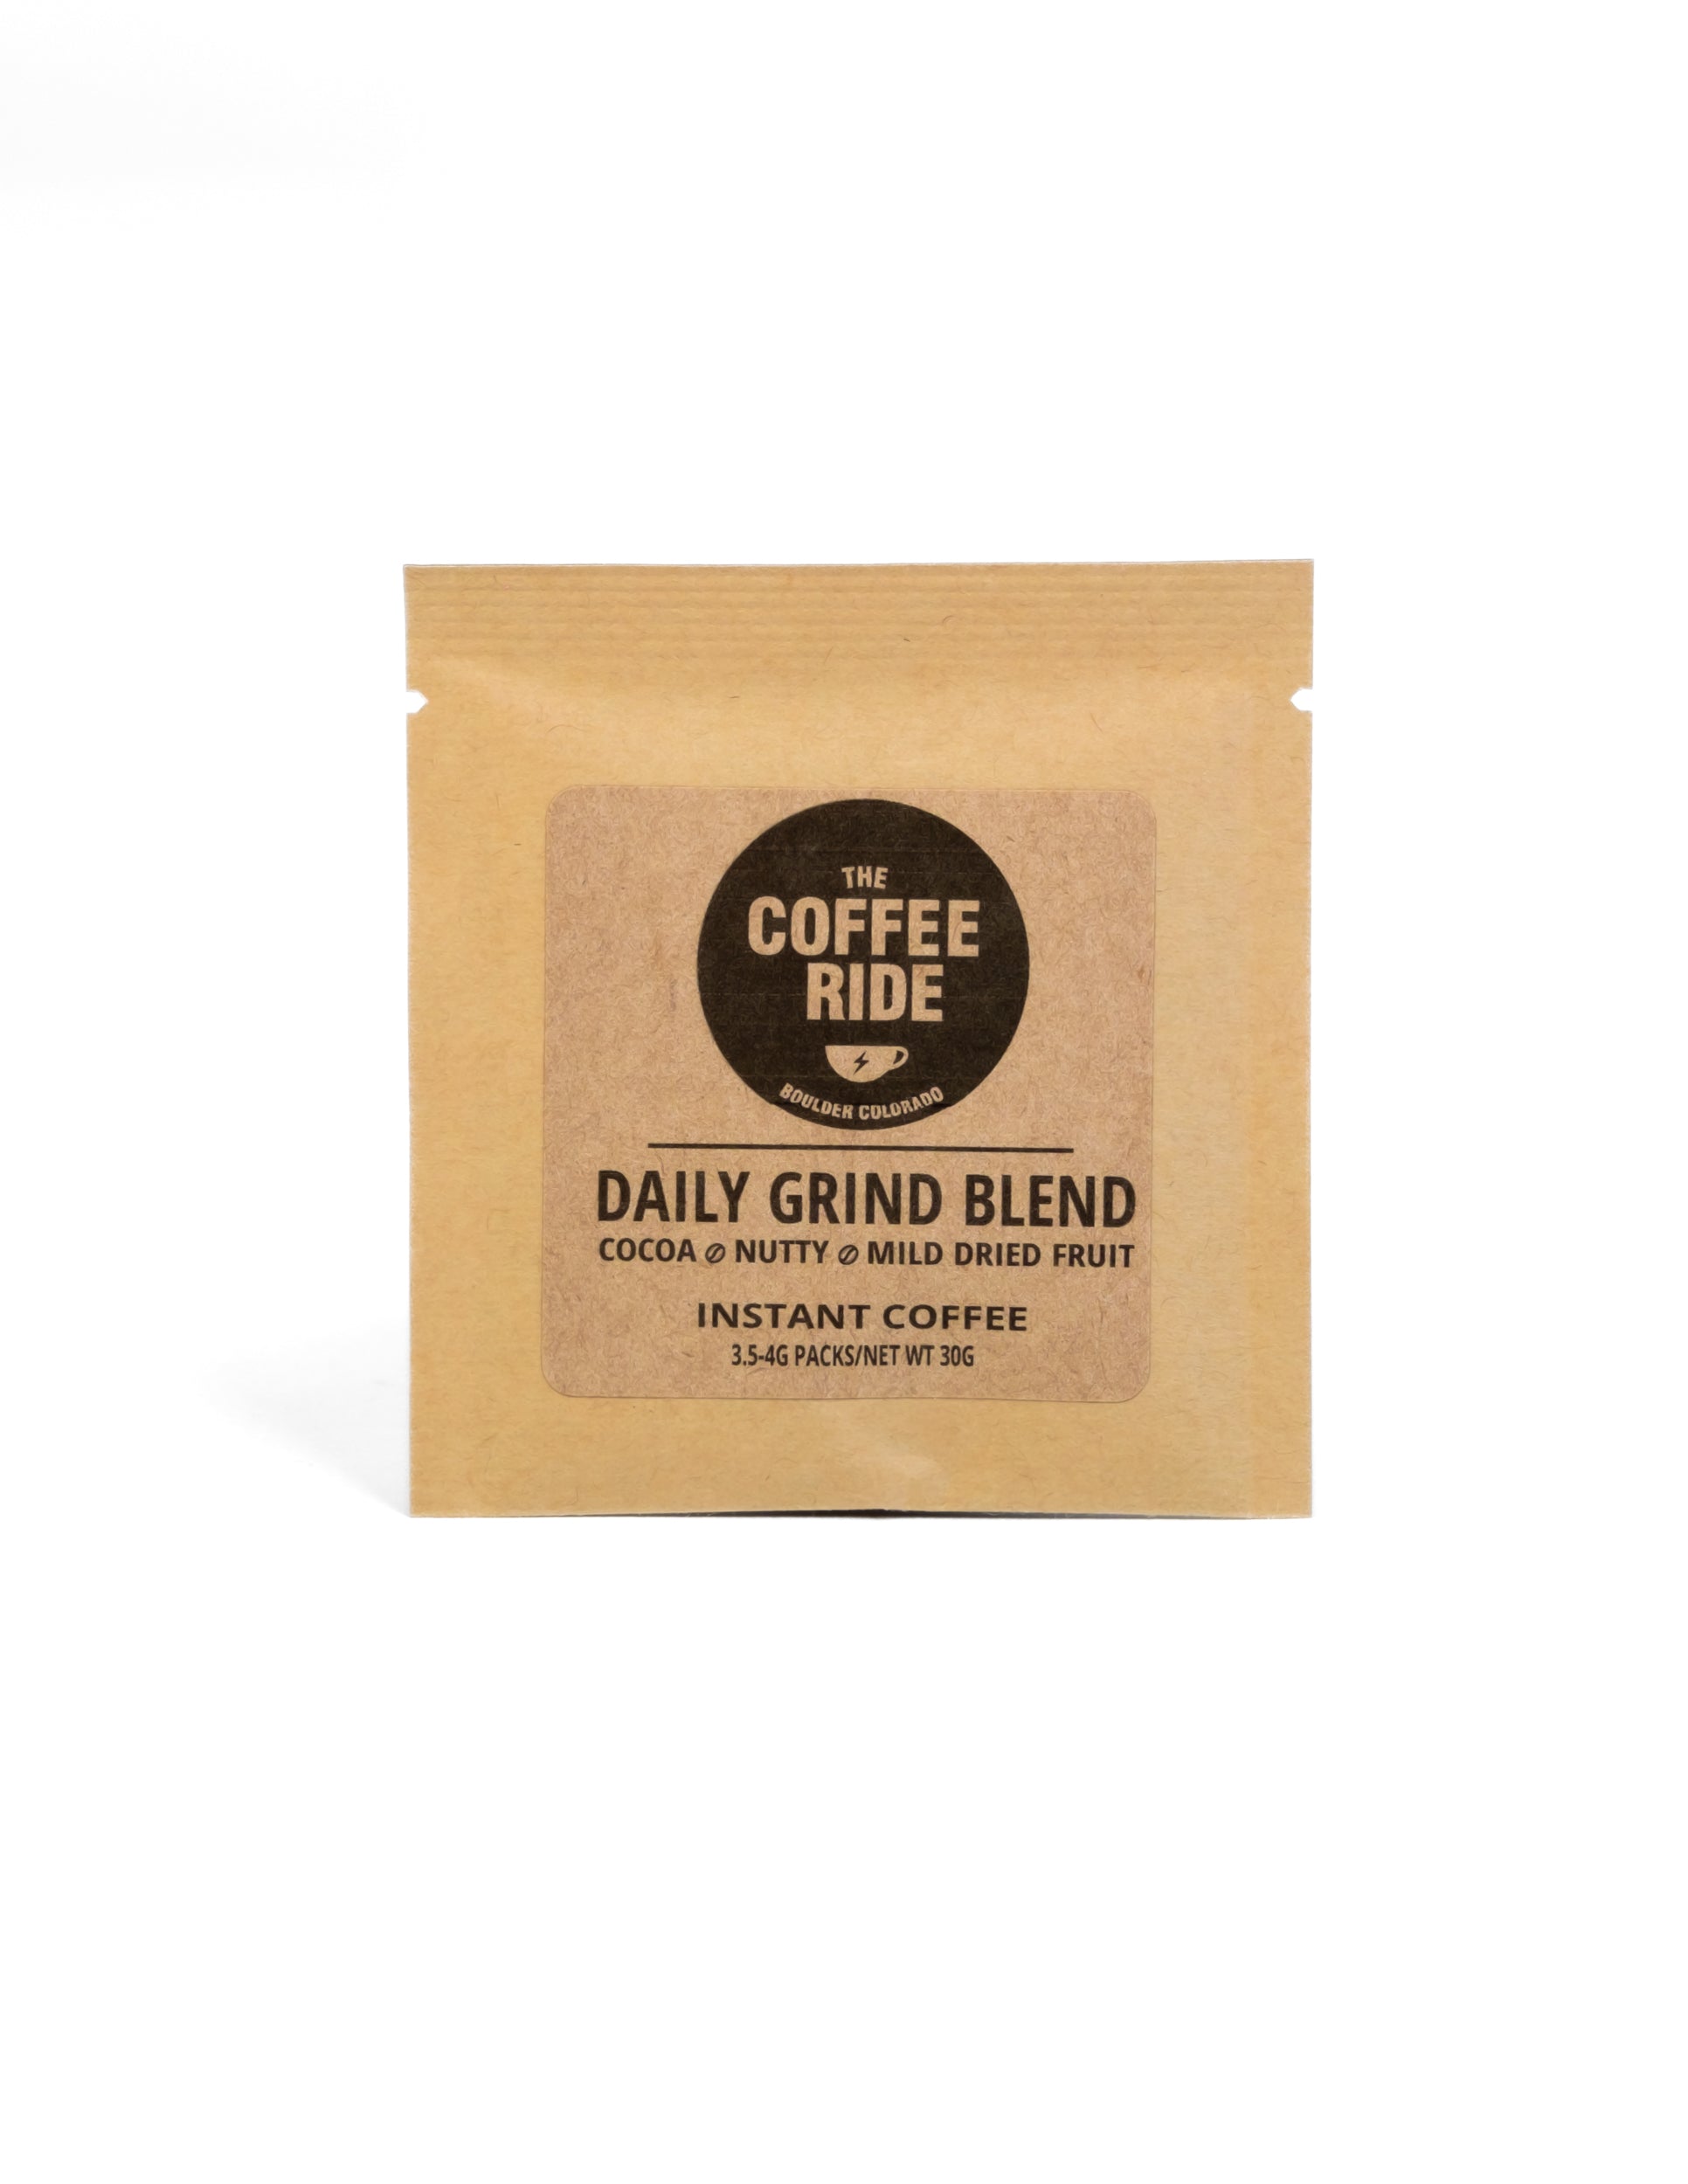 INSTANT COFFEE RIDE - THE DAILY GRIND